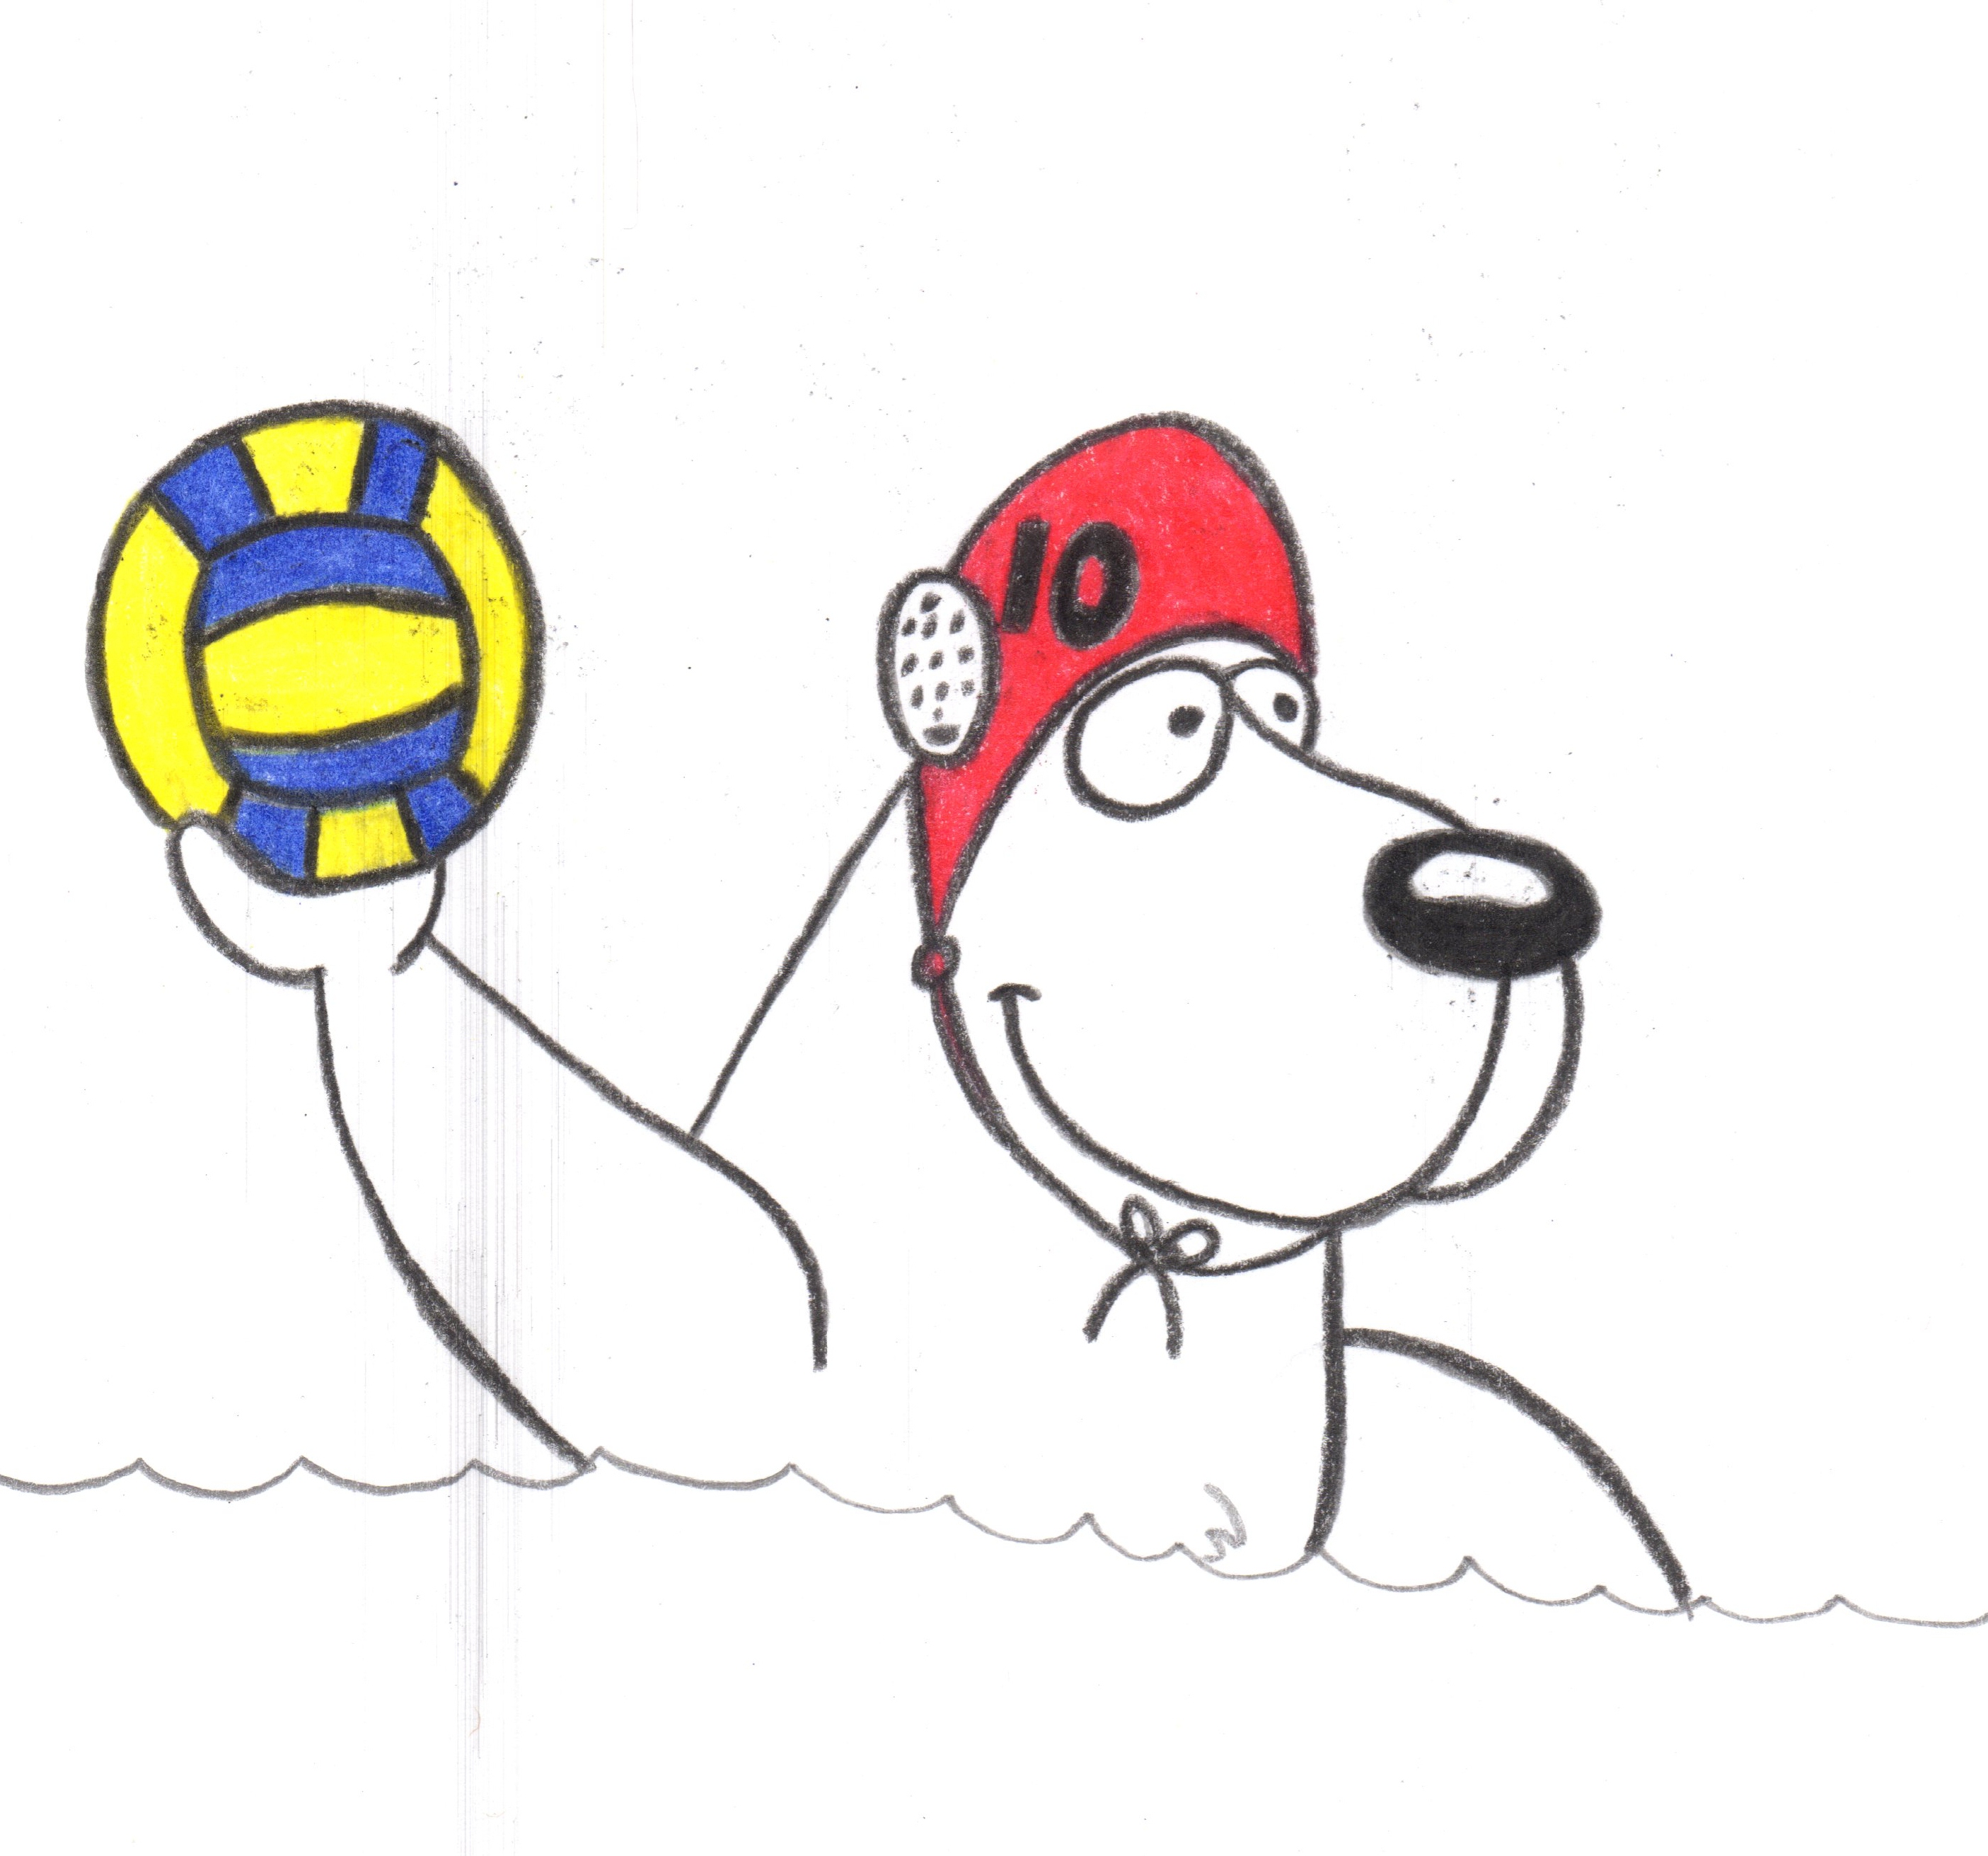 Polar Bear League welcomes those new to water polo